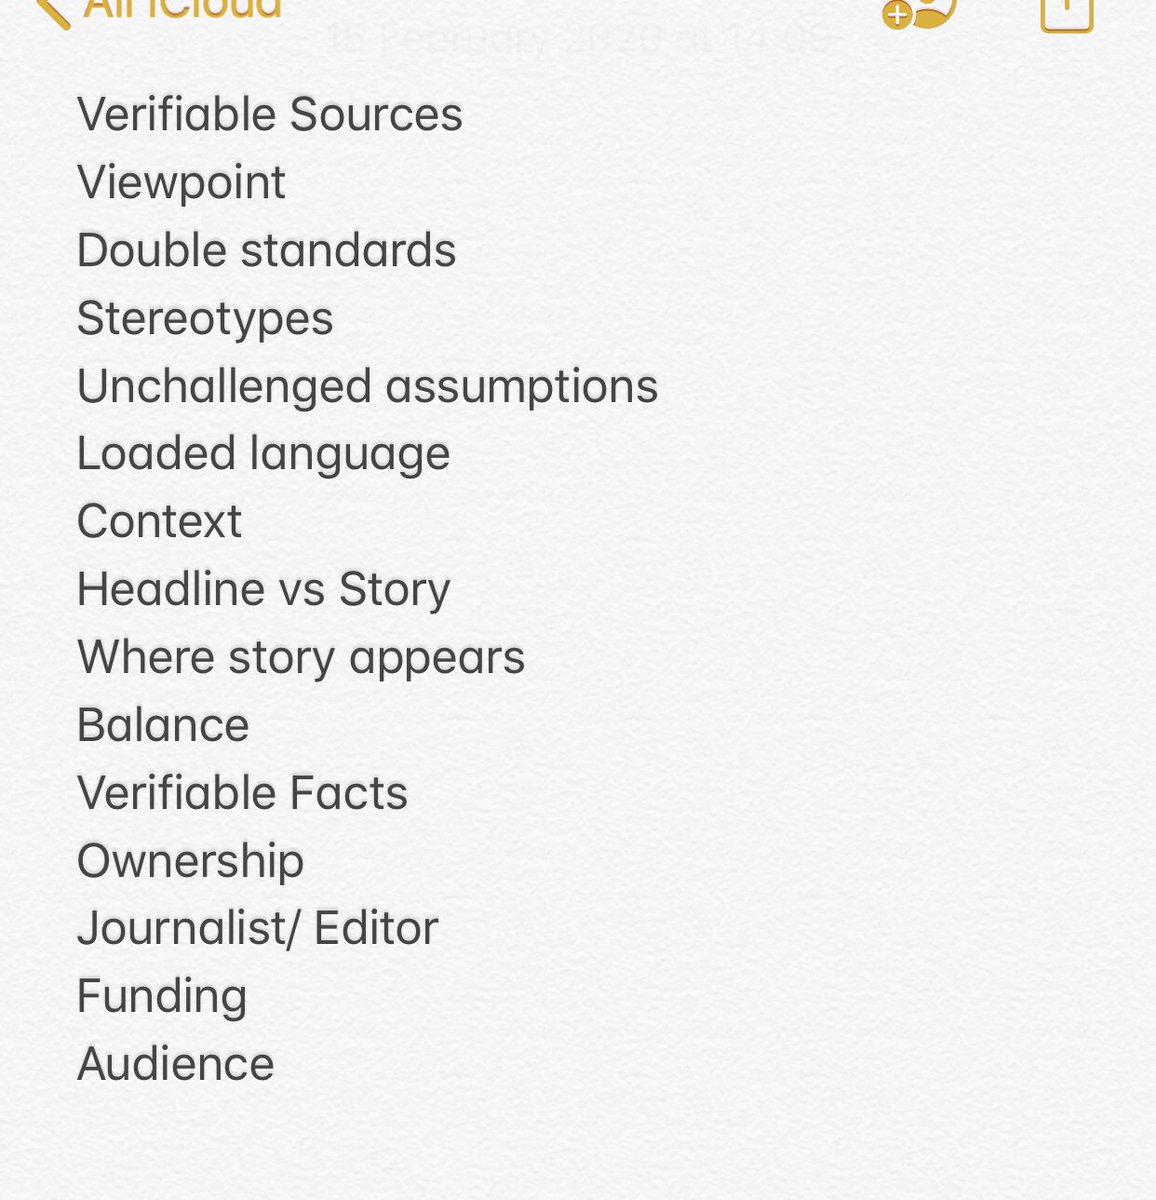 CHECK YOUR SOURCES by assessing these factors. Compare a Reuter’s article to your source and if there is bias, it will be obvious. Center sources are most trustworthy/least biased/highly factual  #MediaBiasIsASpectrum